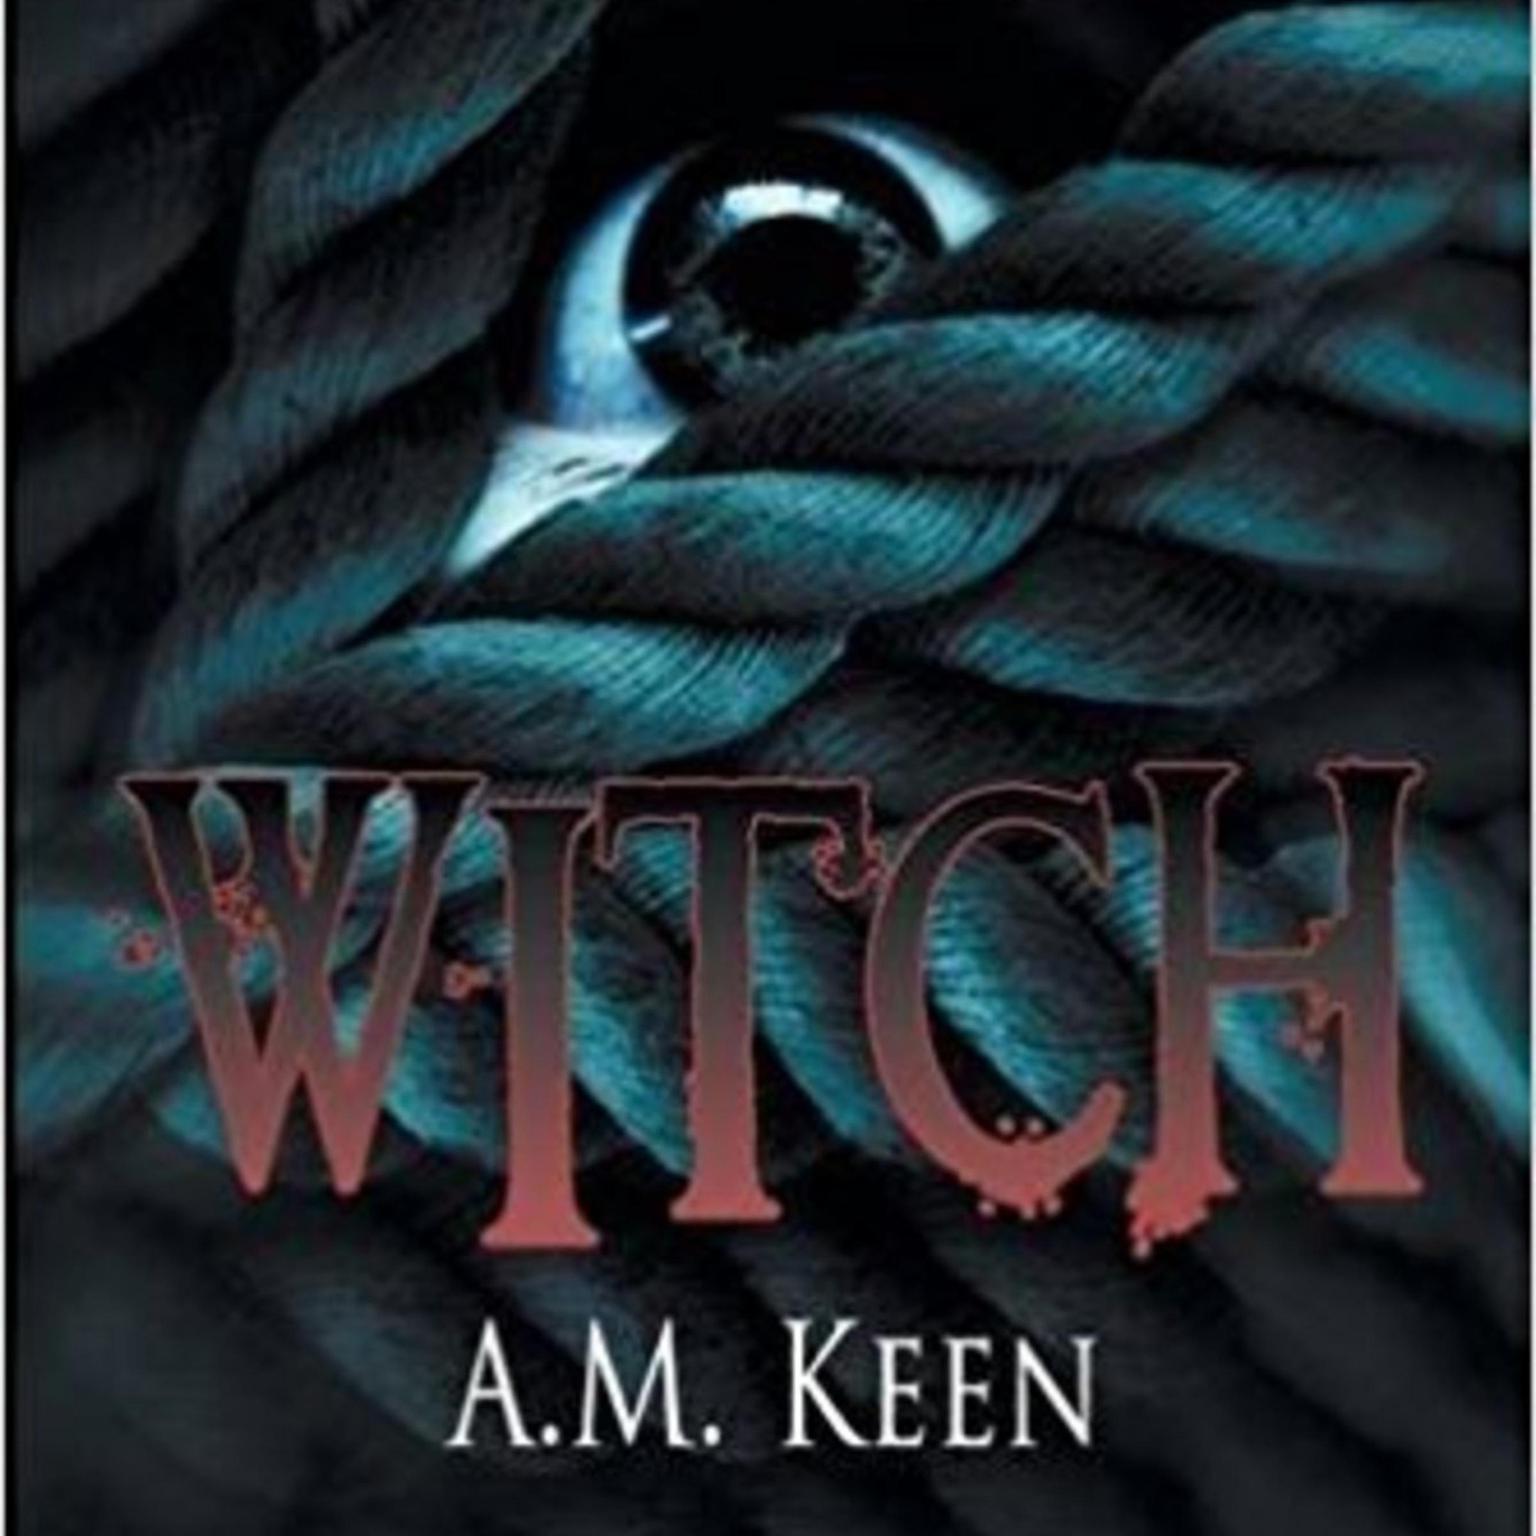 Witch Audiobook, by A. M. Keen